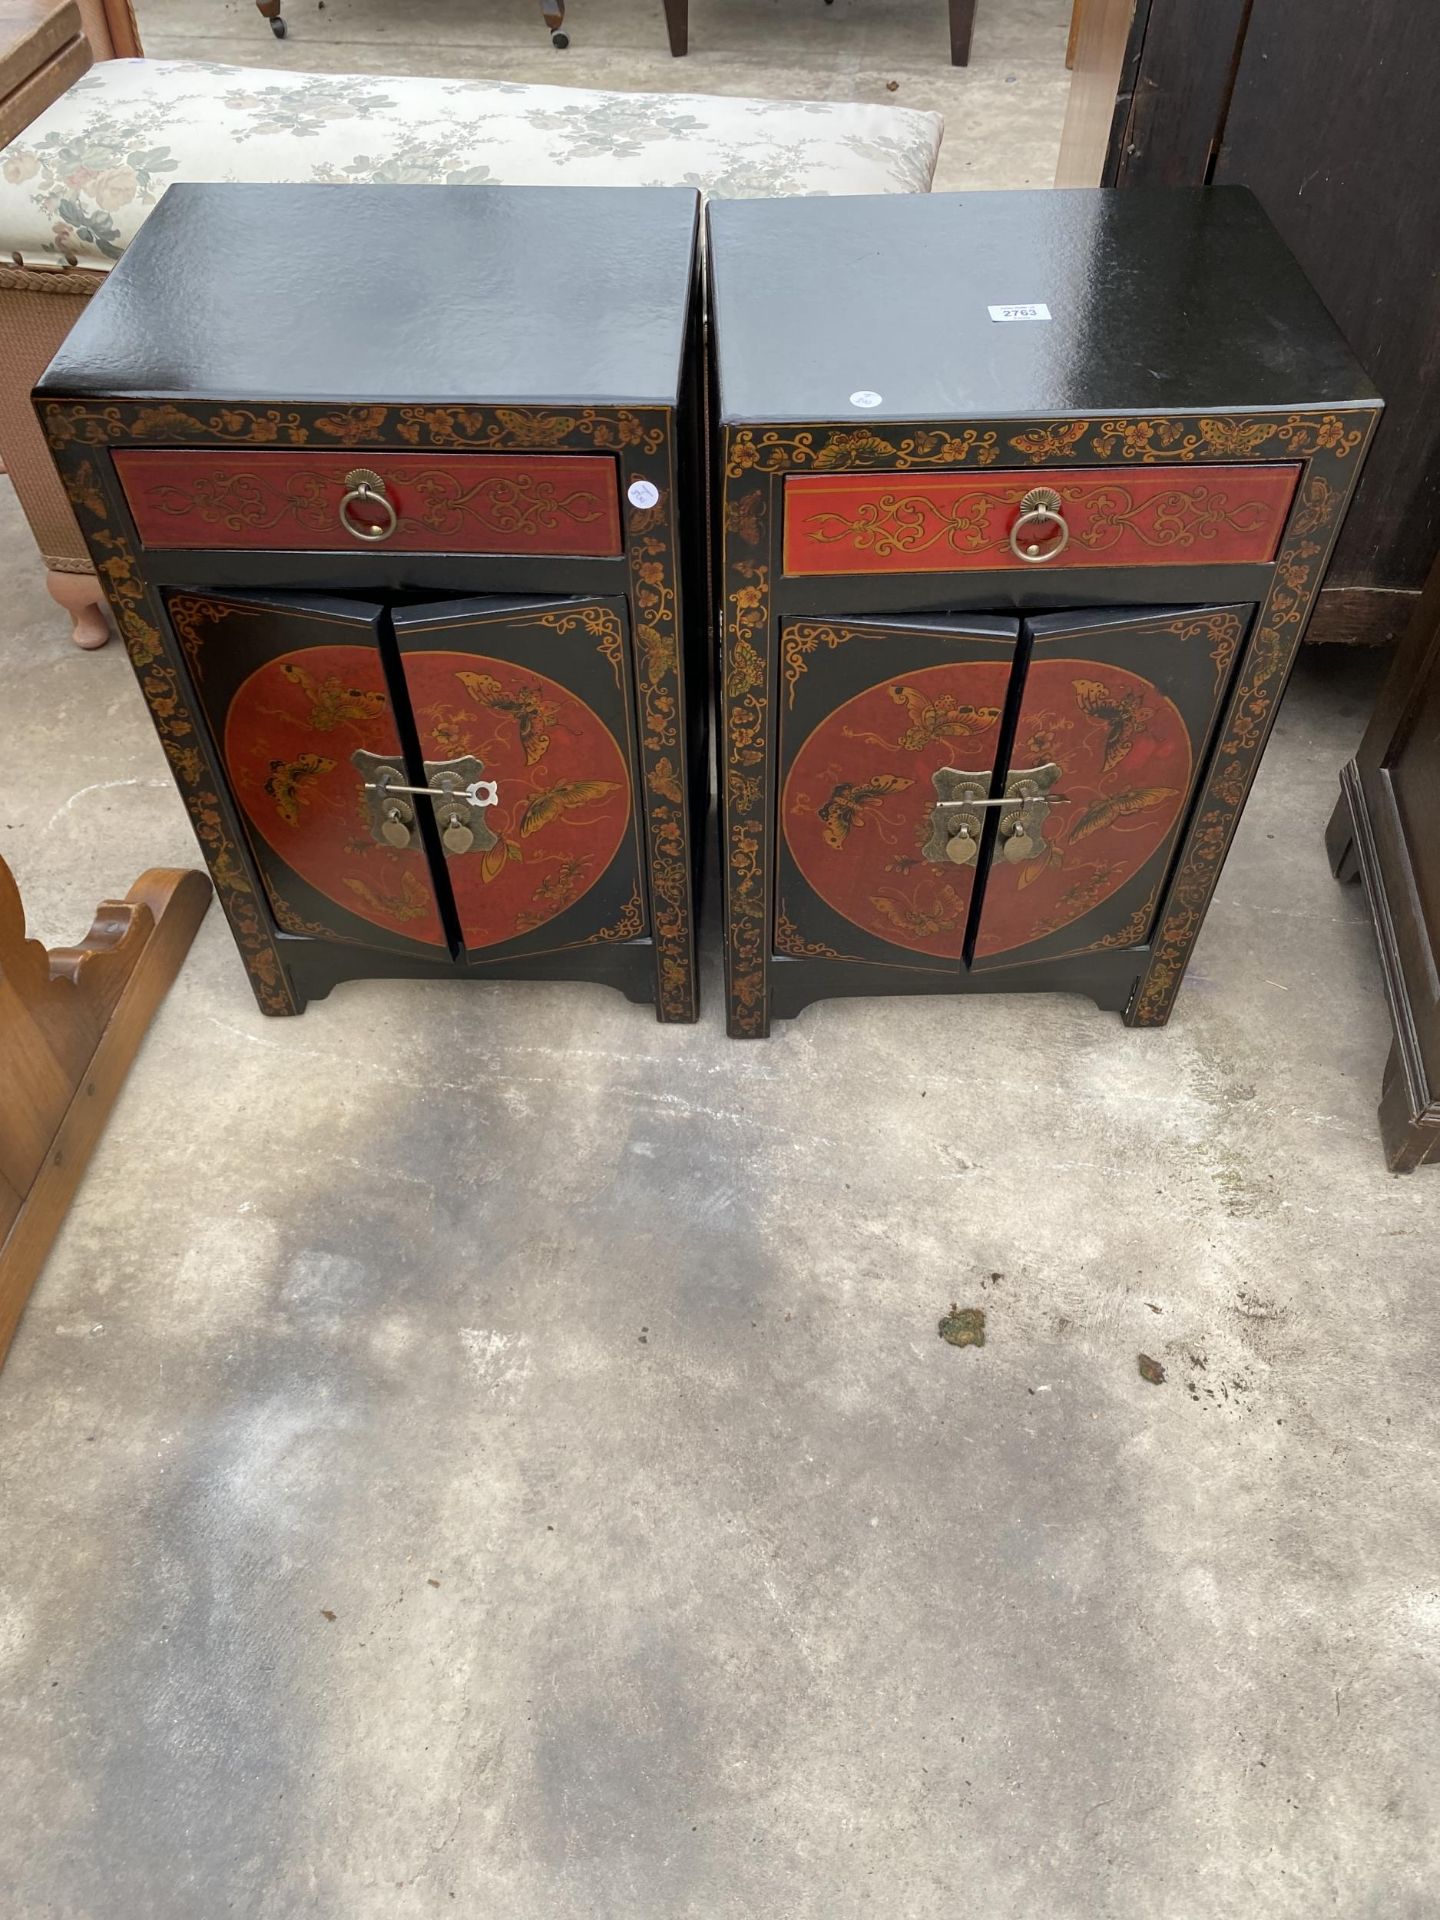 A PAIR OF ORIENTAL BEDSIDE LOCKERS WITH CHINOISERIE DECORATION